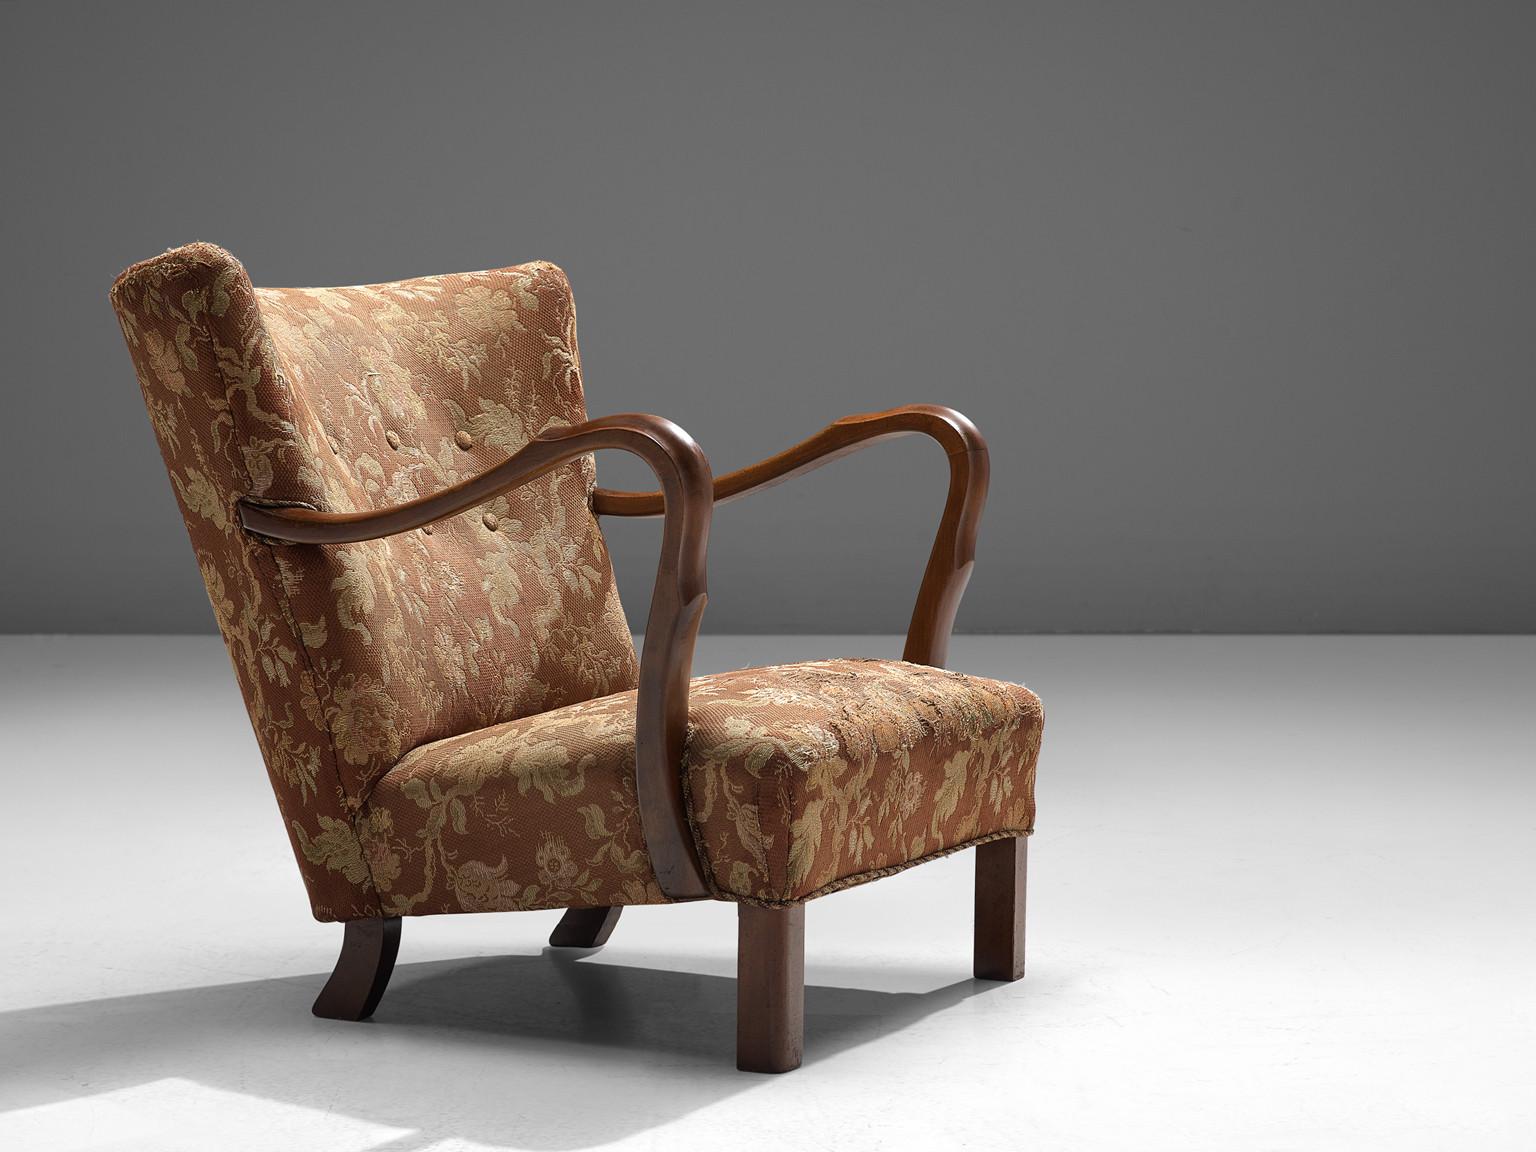 Lounge chair, wood and floral upholstery, Italy, 1930s.
 
Italian armchairs in Art Deco style of the 1930s. The most distinctive feature of this easy chairs are the armrests elegantly curved around the seating. The warm color of the wood armrests